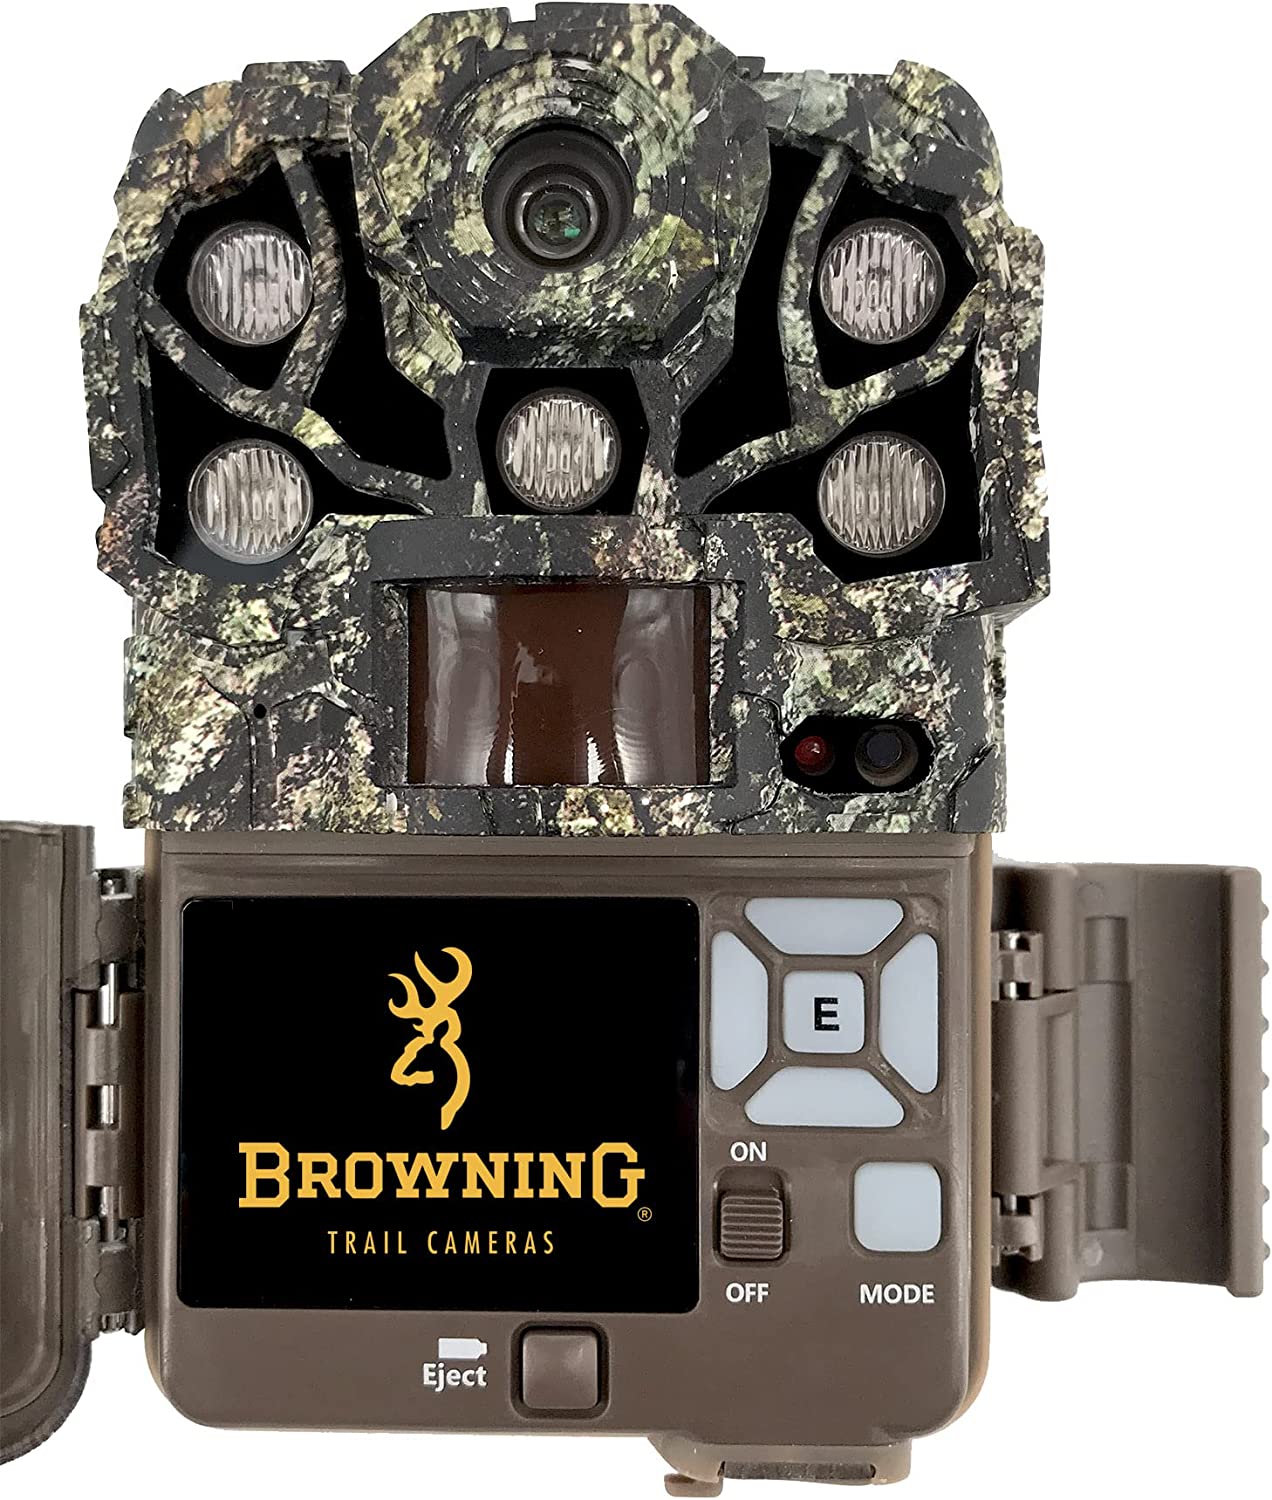 Browning Trail Camera Recon Force Elite HP5 - image 2 of 2